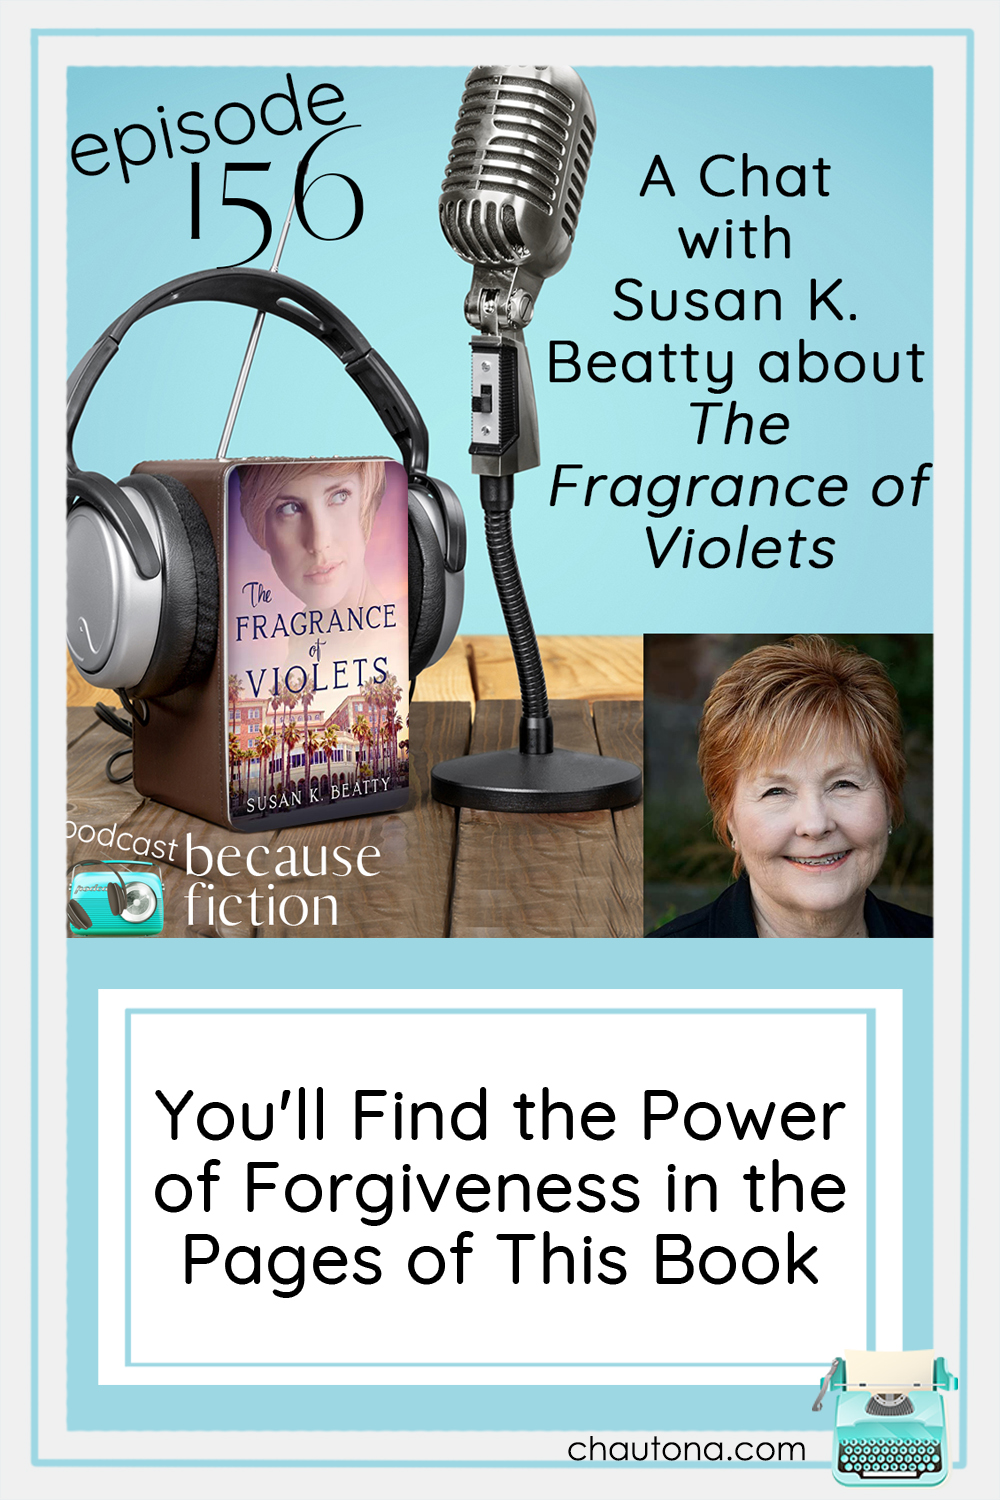 You won't want to miss the story of love and forgiveness within the pages of The Fragrance of Violets by Susan K. Beatty. via @chautonahavig